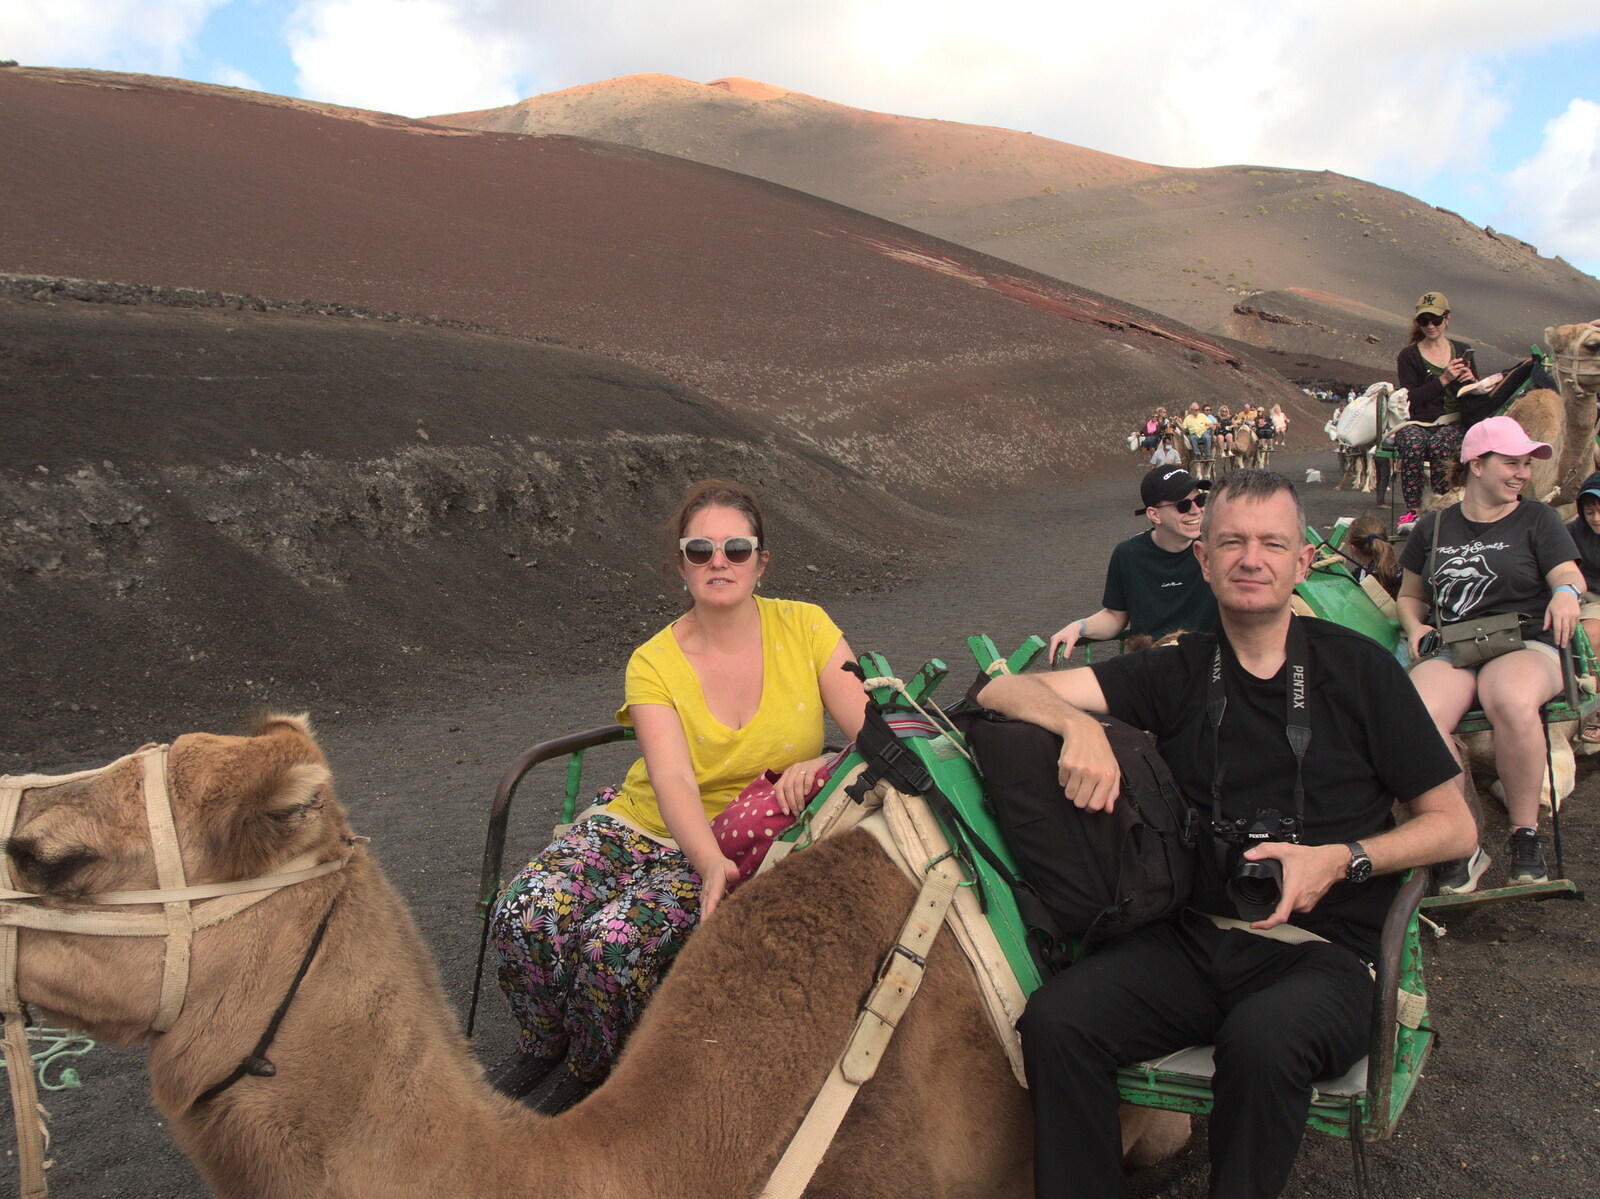 Isobel and Nosher on a dromedary from The Volcanoes of Lanzarote, Canary Islands, Spain - 27th October 2021